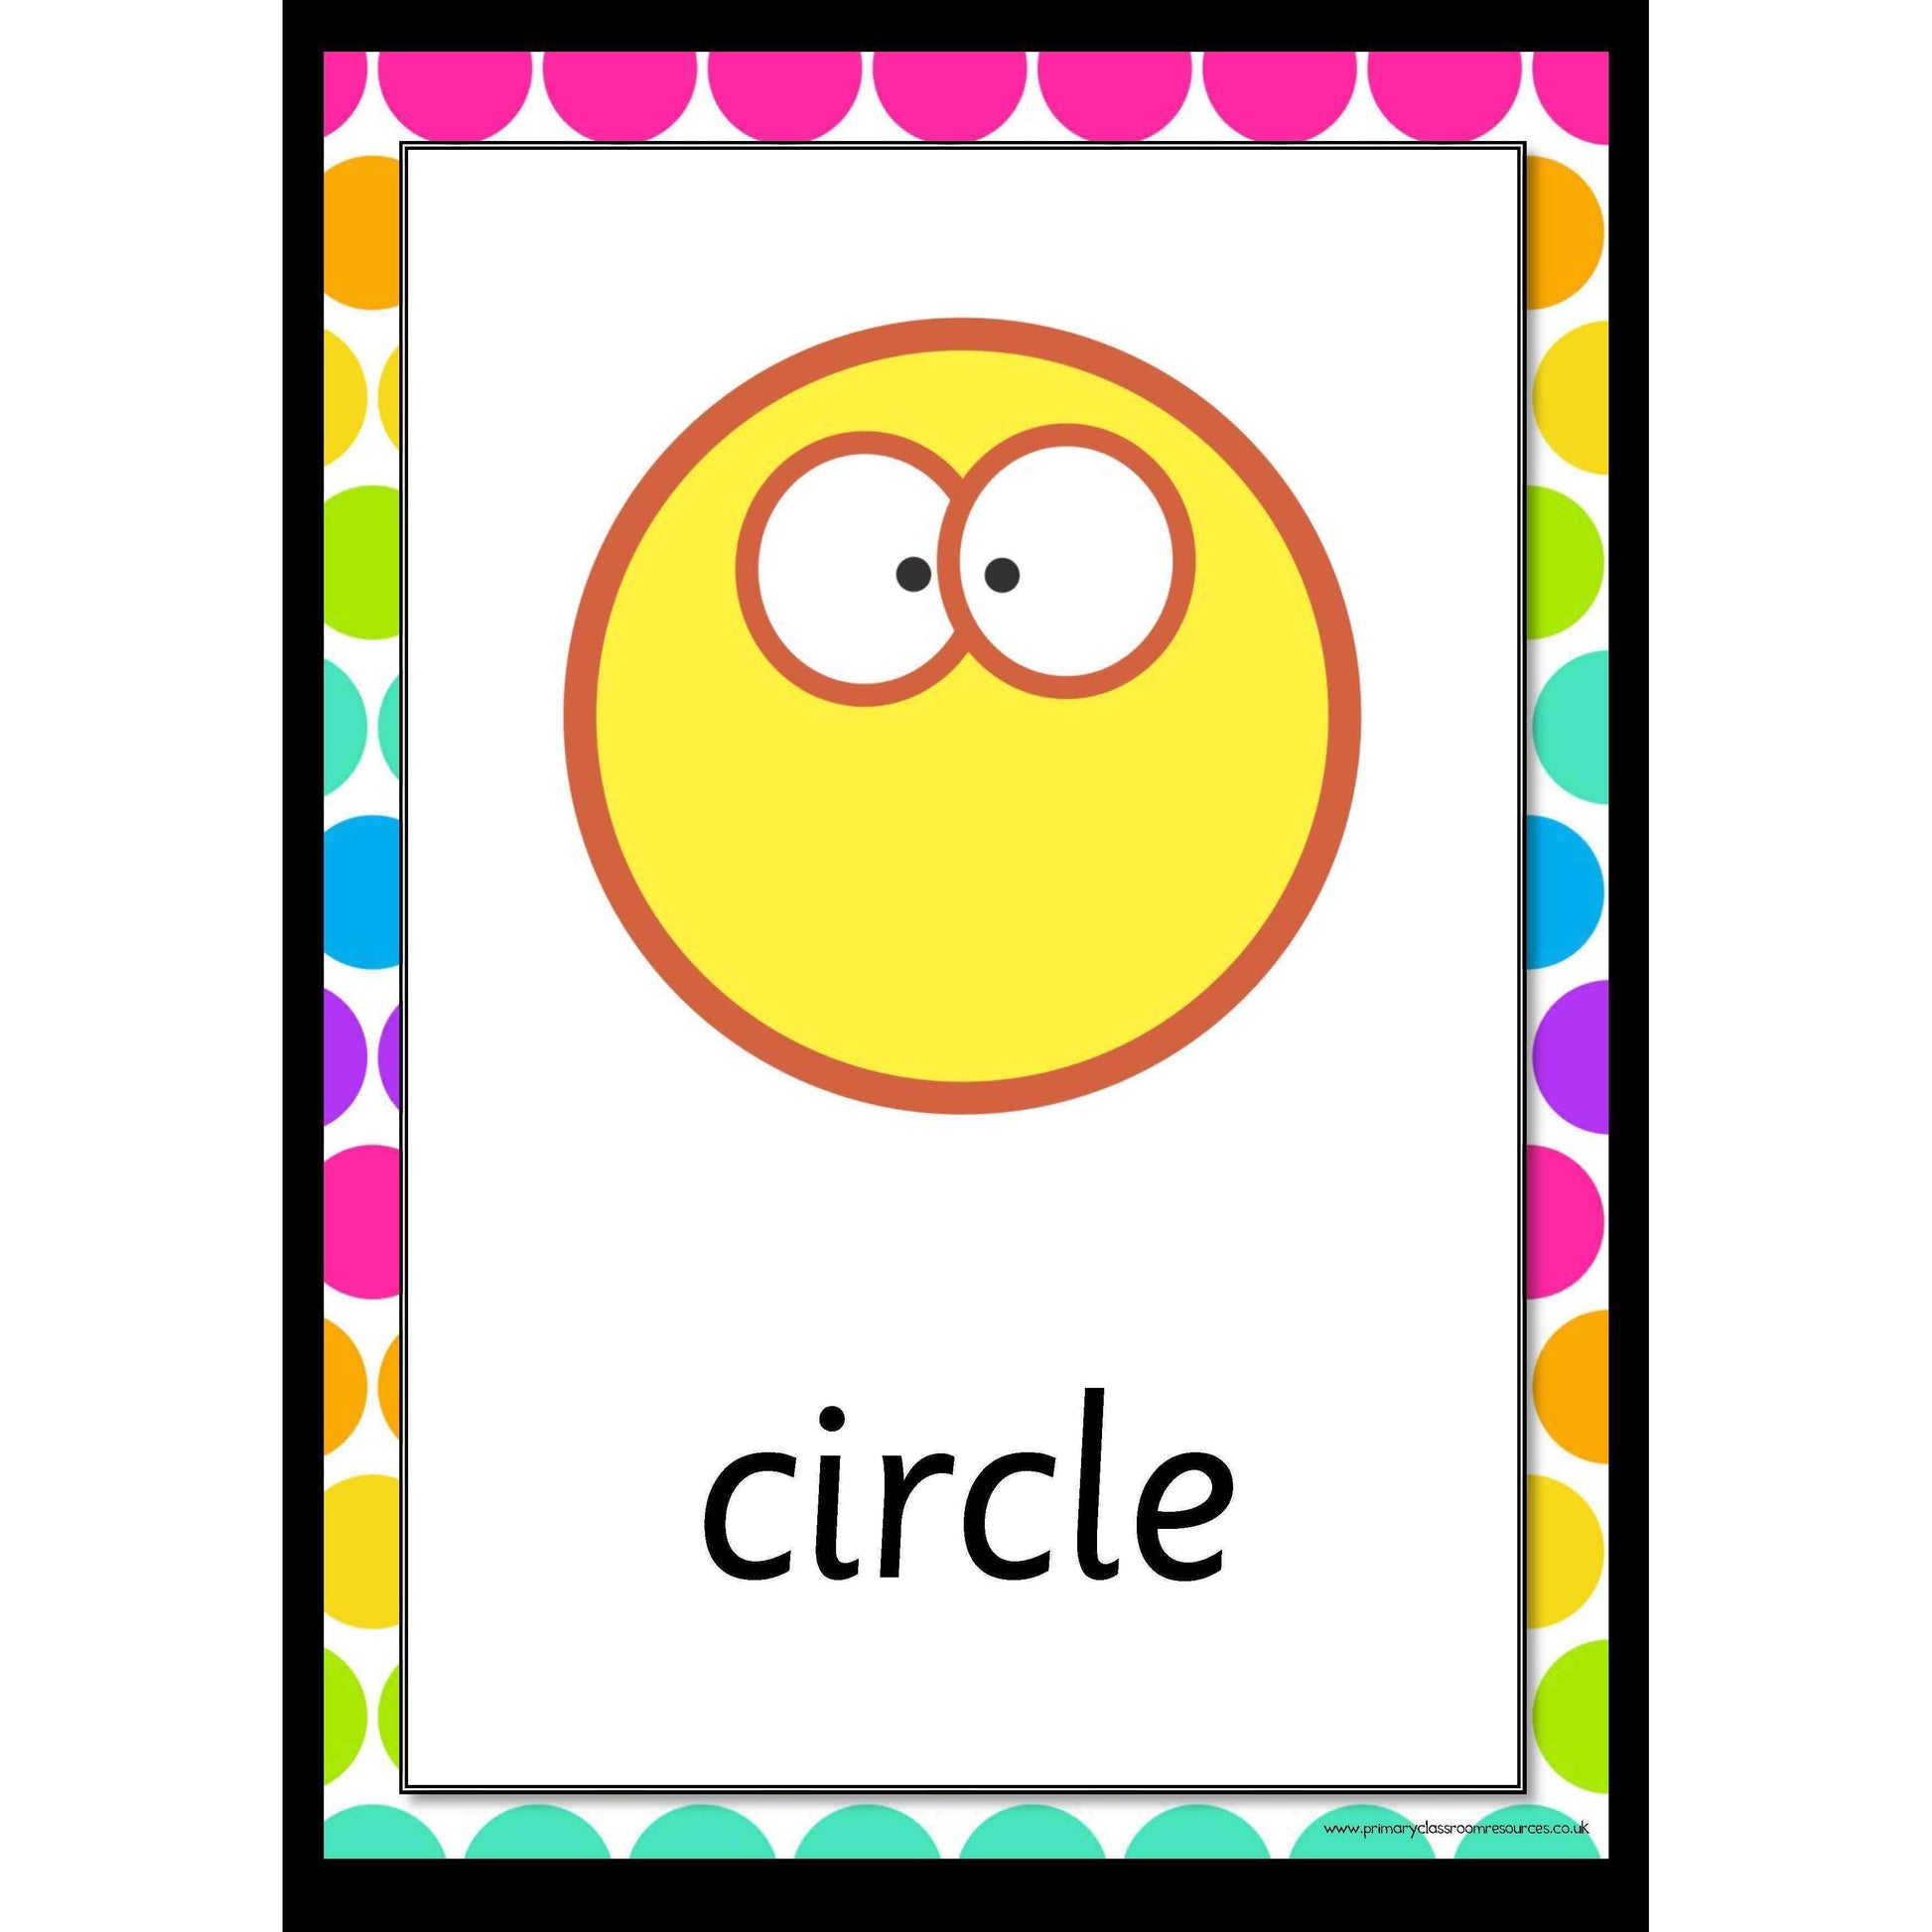 Rainbow 2D Shapes Posters:Primary Classroom Resources